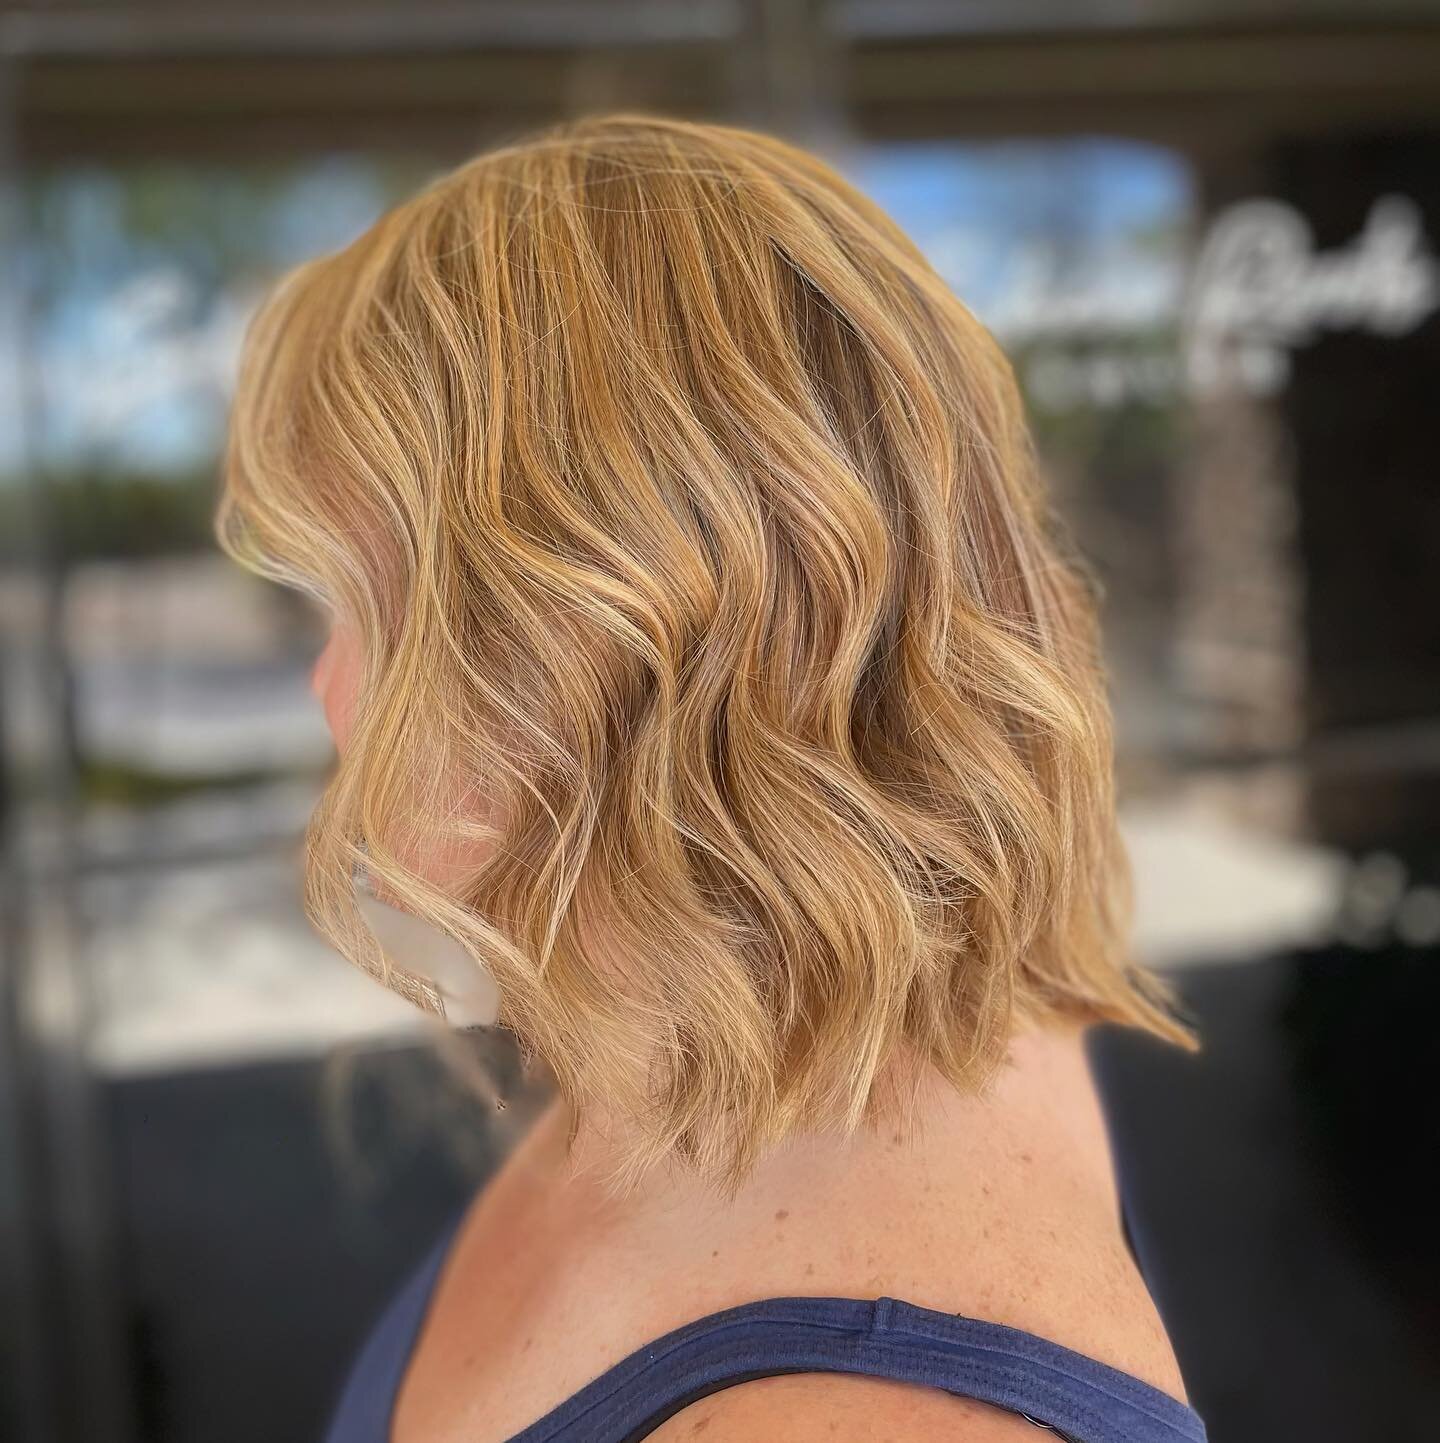 Absolutely fell in love with this #babylights and #lowlights combo on Erica. Don&rsquo;t be scared to have a little warmth in your blonde with some lowlights to give your hair more dimension. 

Formula: 
Babylights with 20V
Lowlights with Majirel 7CC